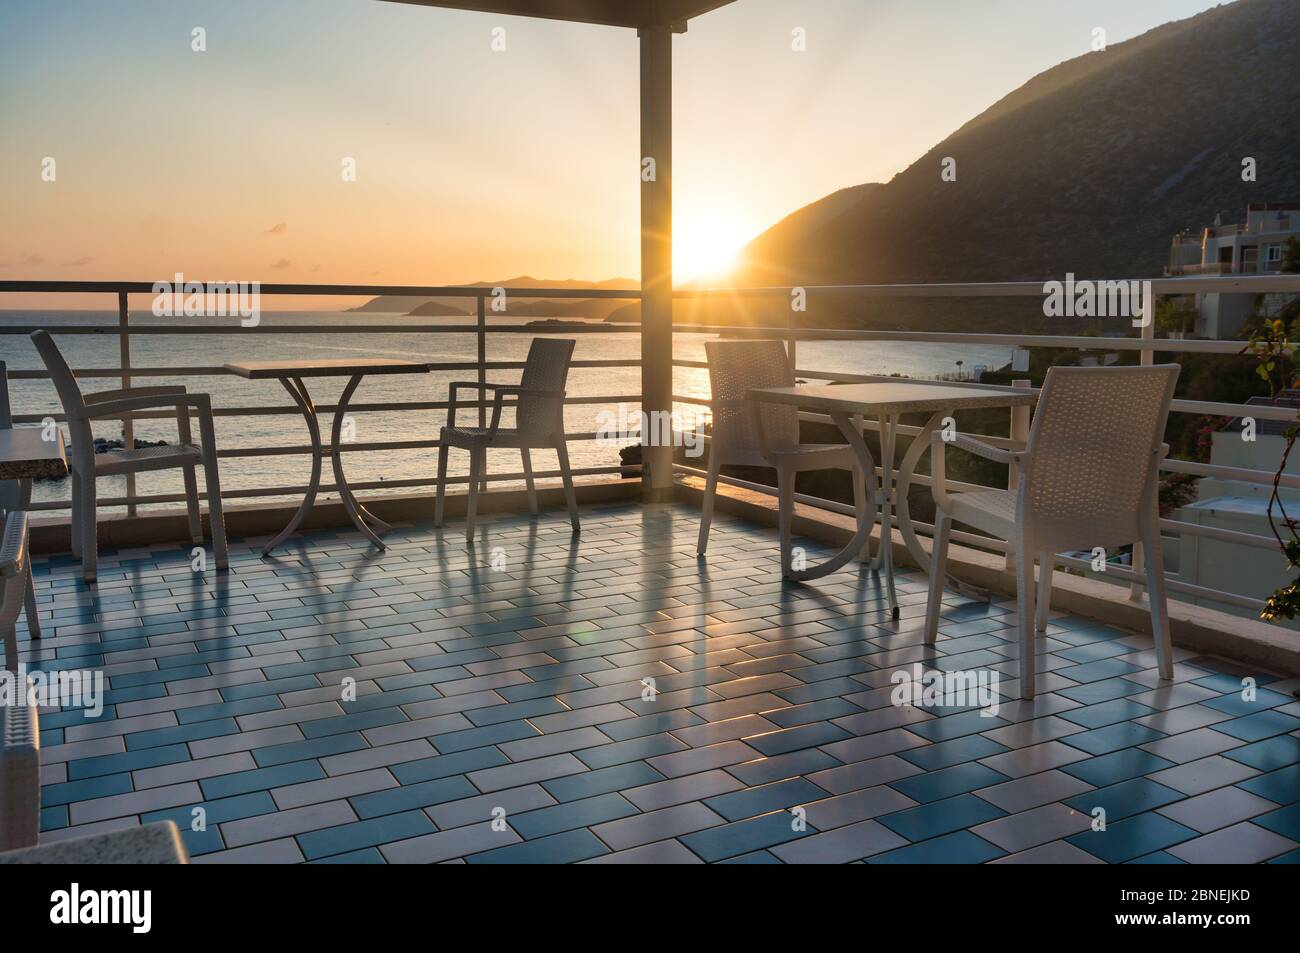 The setting sun illuminates the summer terrace with cozy tables and chairs against the backdrop of the sea and mountains. Travel invitation Stock Photo